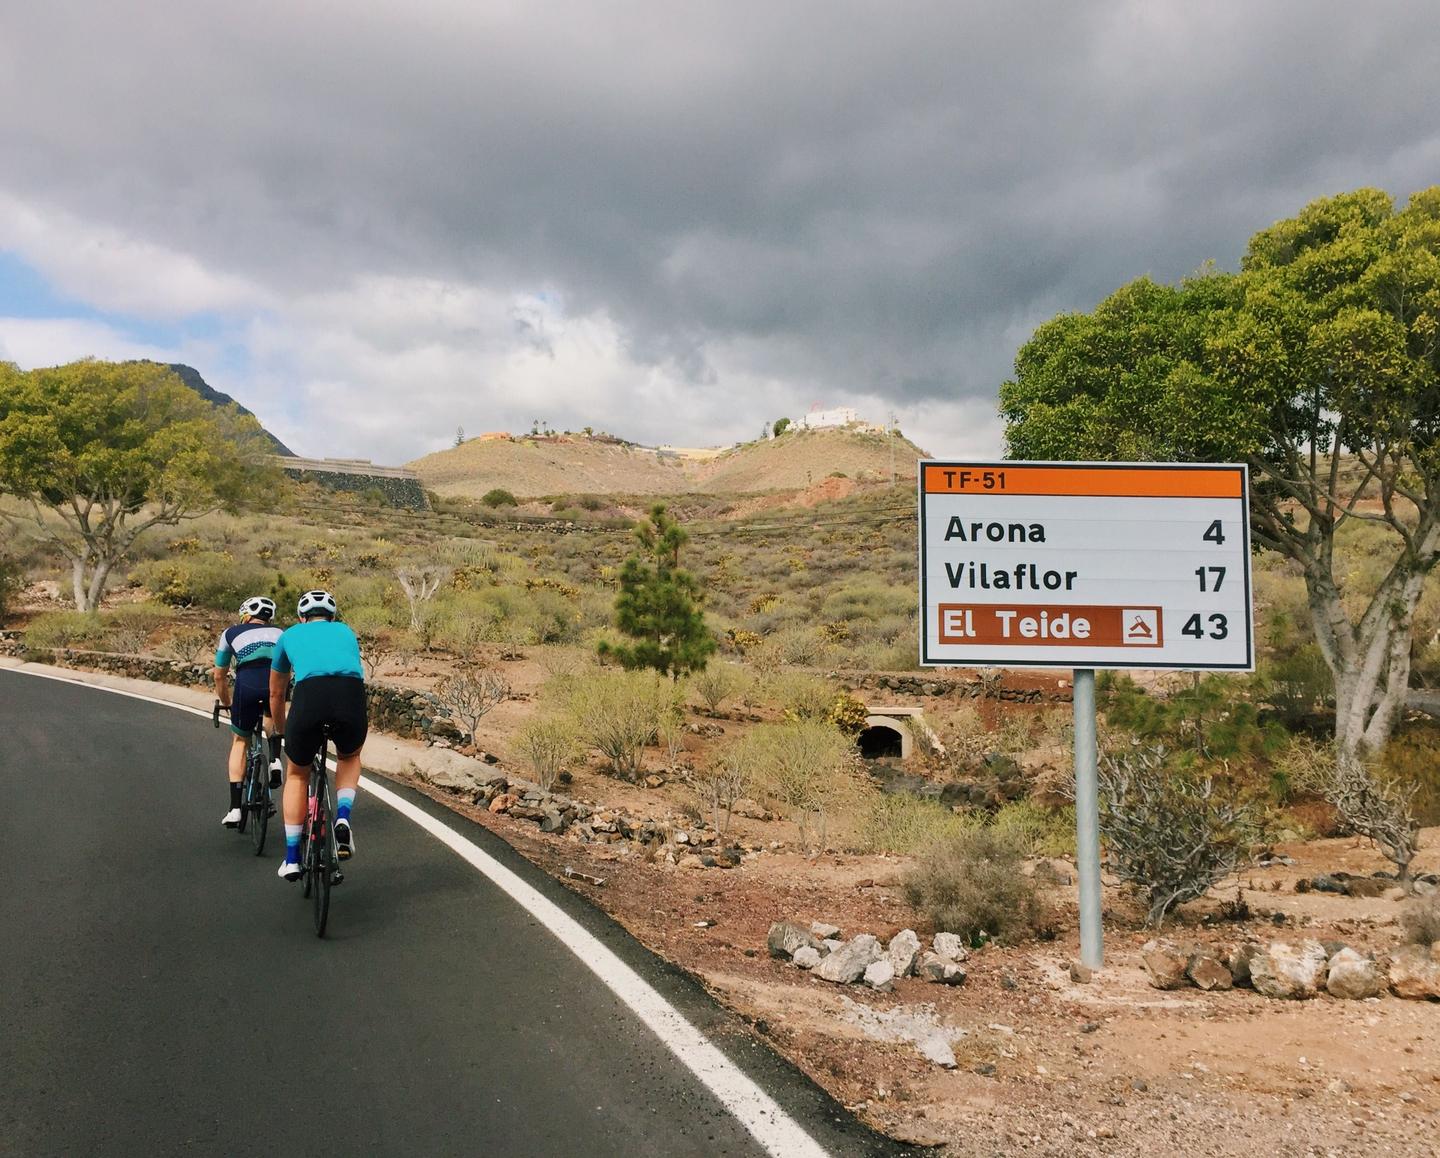 Two cyclists riding on a scenic road in Tenerife with a sign indicating distances to Arona, Vilaflor, and El Teide. The landscape features a mix of trees and hills under a cloudy sky.